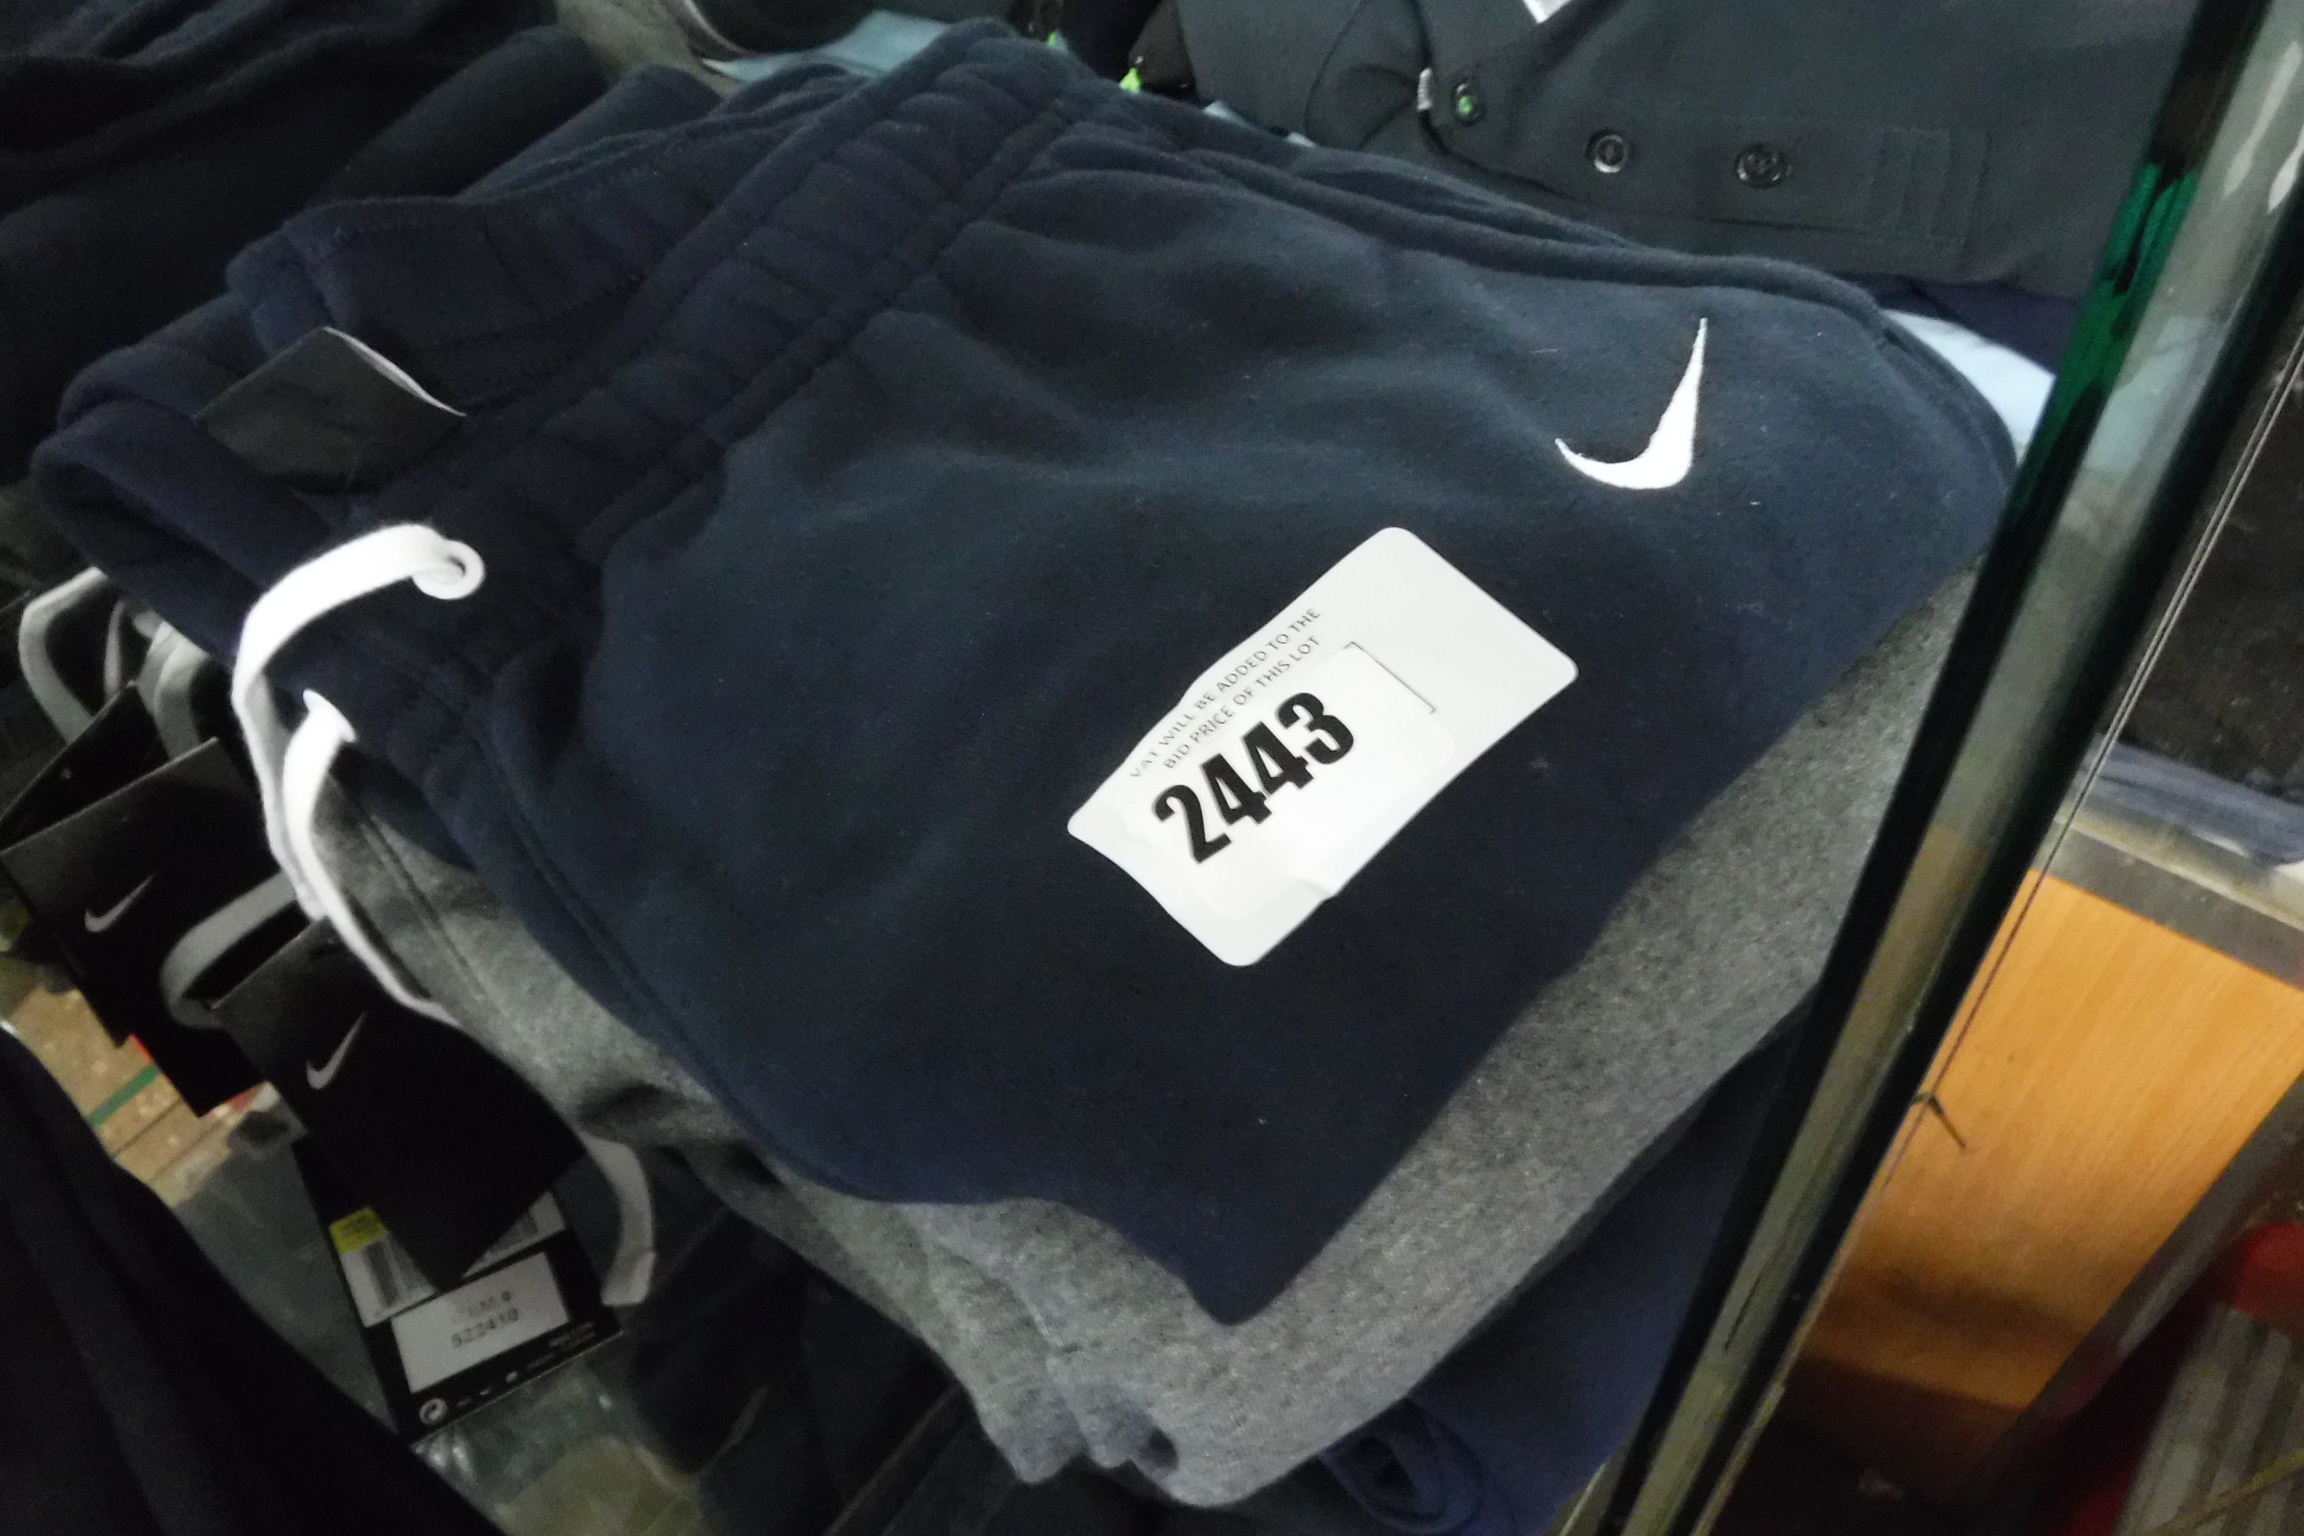 Stack of 5 pairs of Nike tracksuit bottoms in blue, black and grey